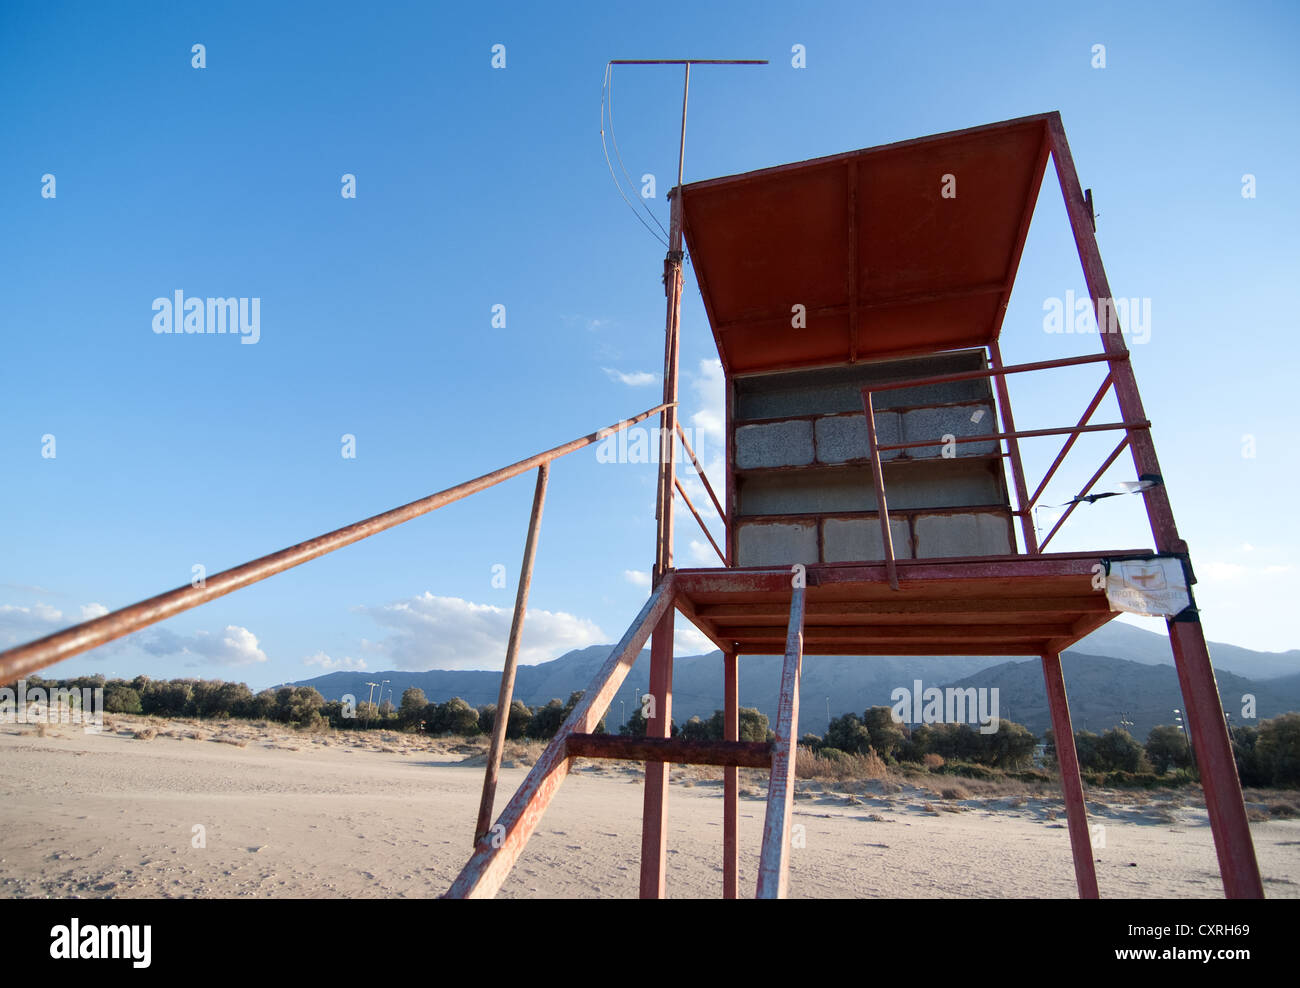 a lifeguards look out post Geogioupolis beach Crete Stock Photo